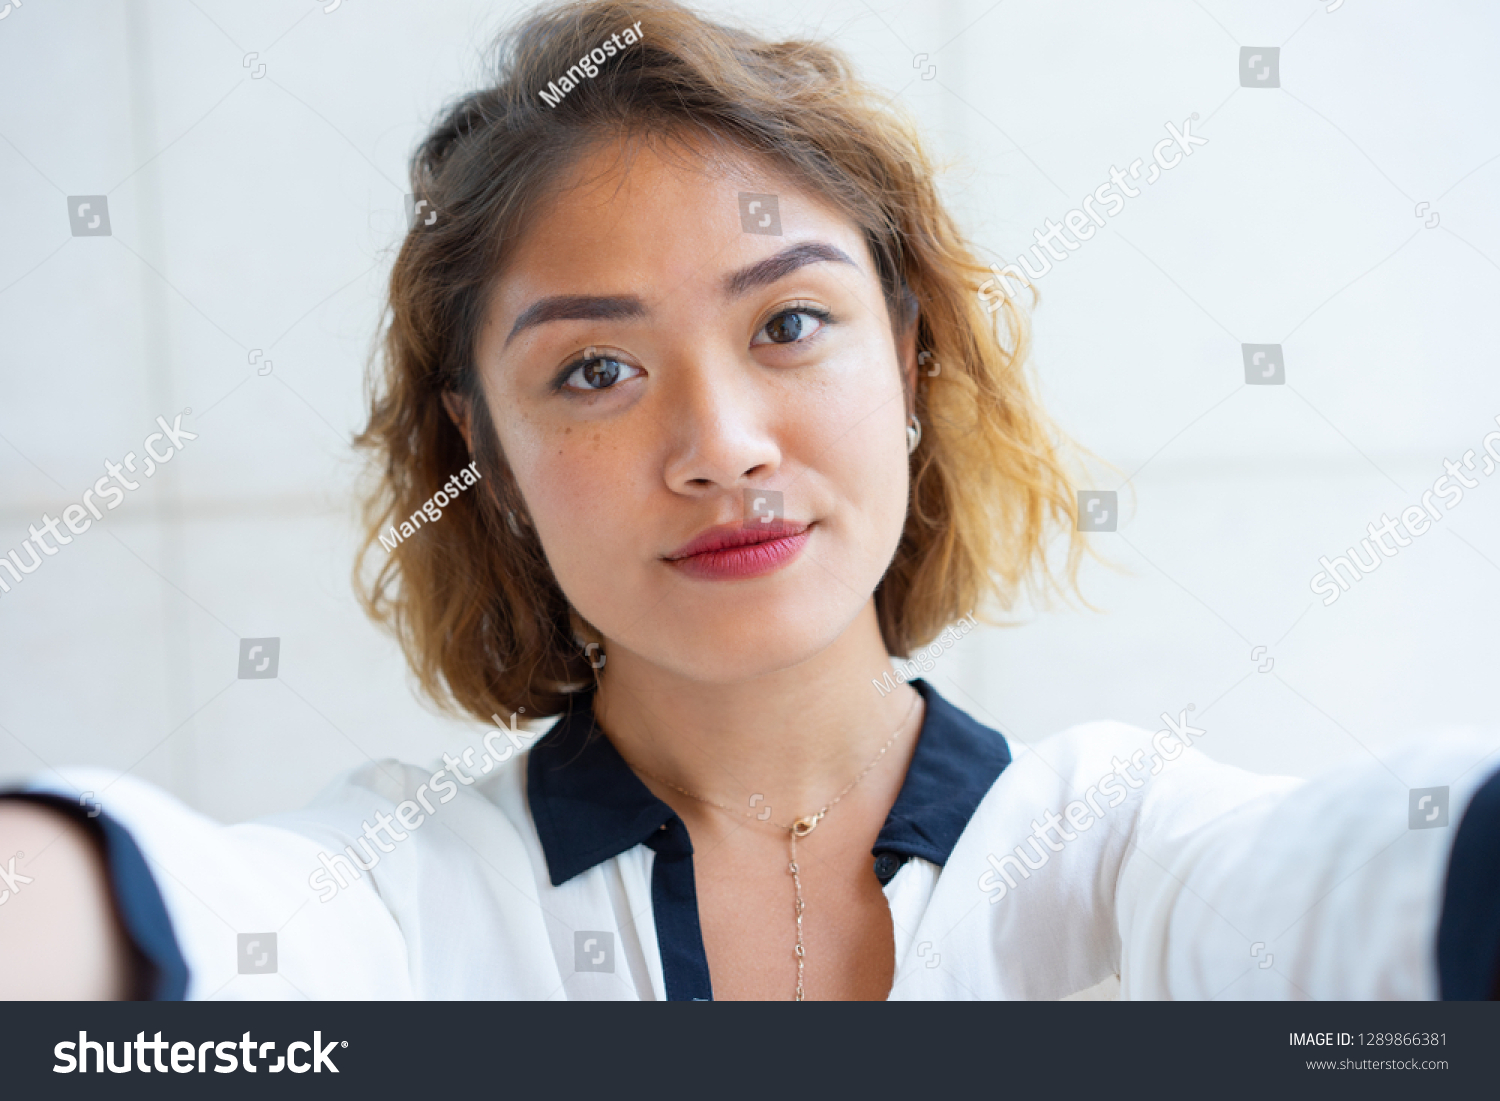 Self portrait of beautiful Chinese girl walking outdoors. Closeup of young attractive woman looking at camera. Selfie concept #1289866381